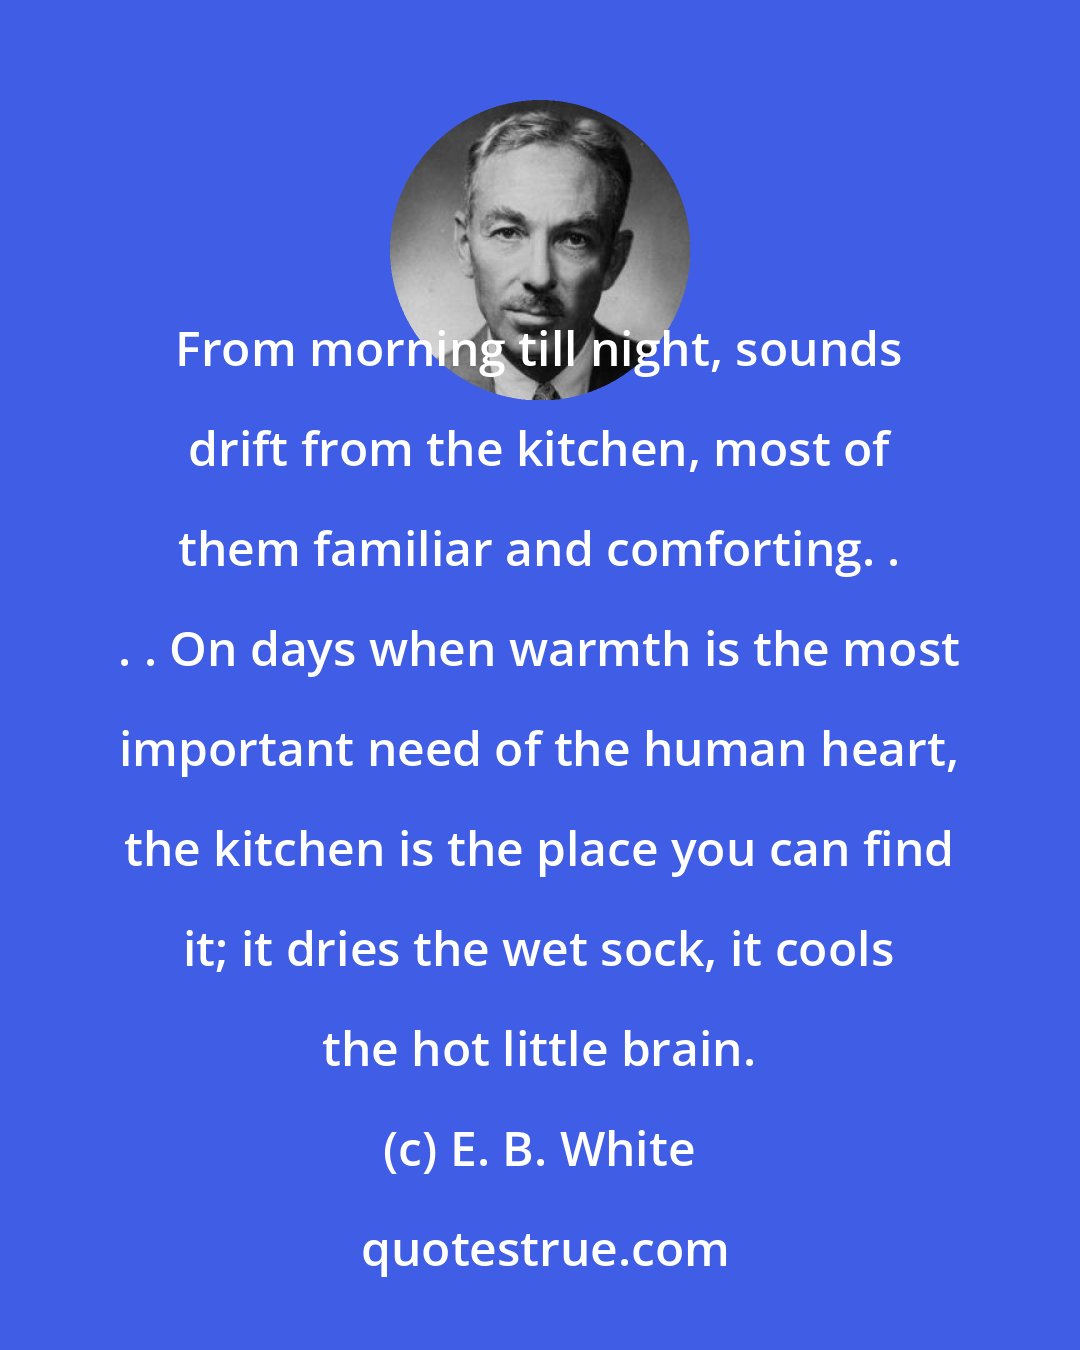 E. B. White: From morning till night, sounds drift from the kitchen, most of them familiar and comforting. . . . On days when warmth is the most important need of the human heart, the kitchen is the place you can find it; it dries the wet sock, it cools the hot little brain.